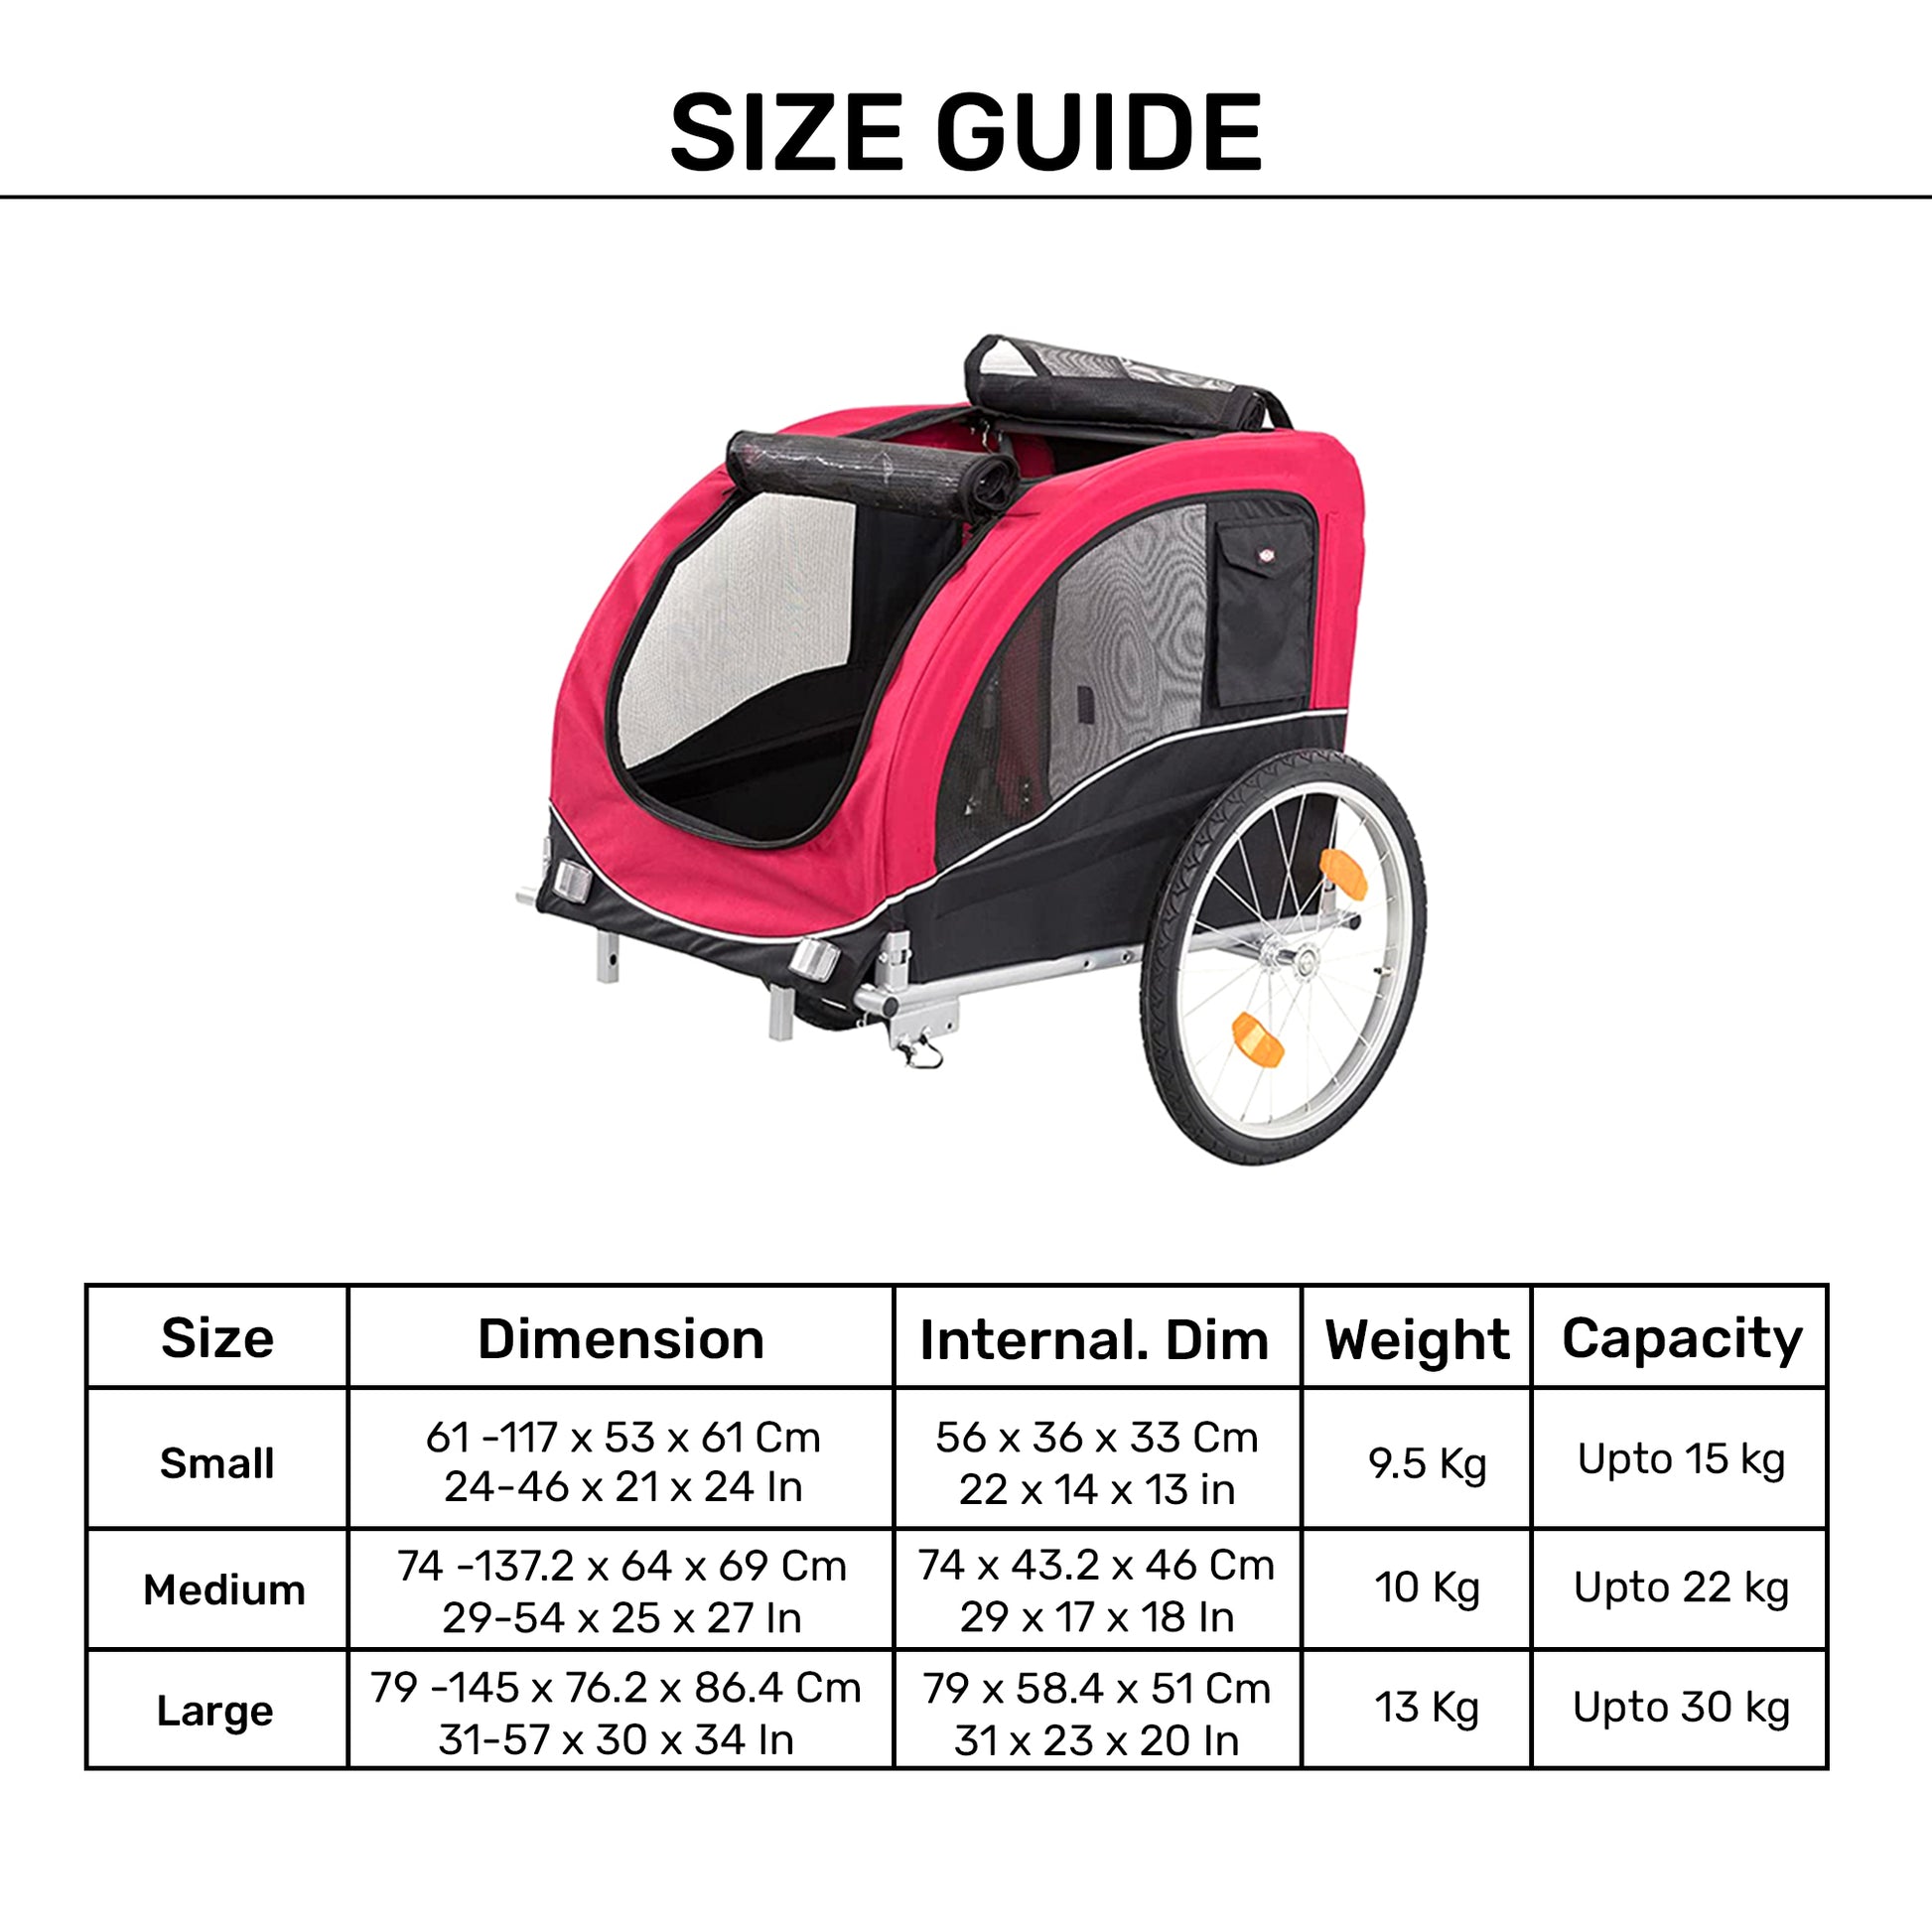 Trixie Red Bicycle Trailer For Dogs - Heads Up For Tails